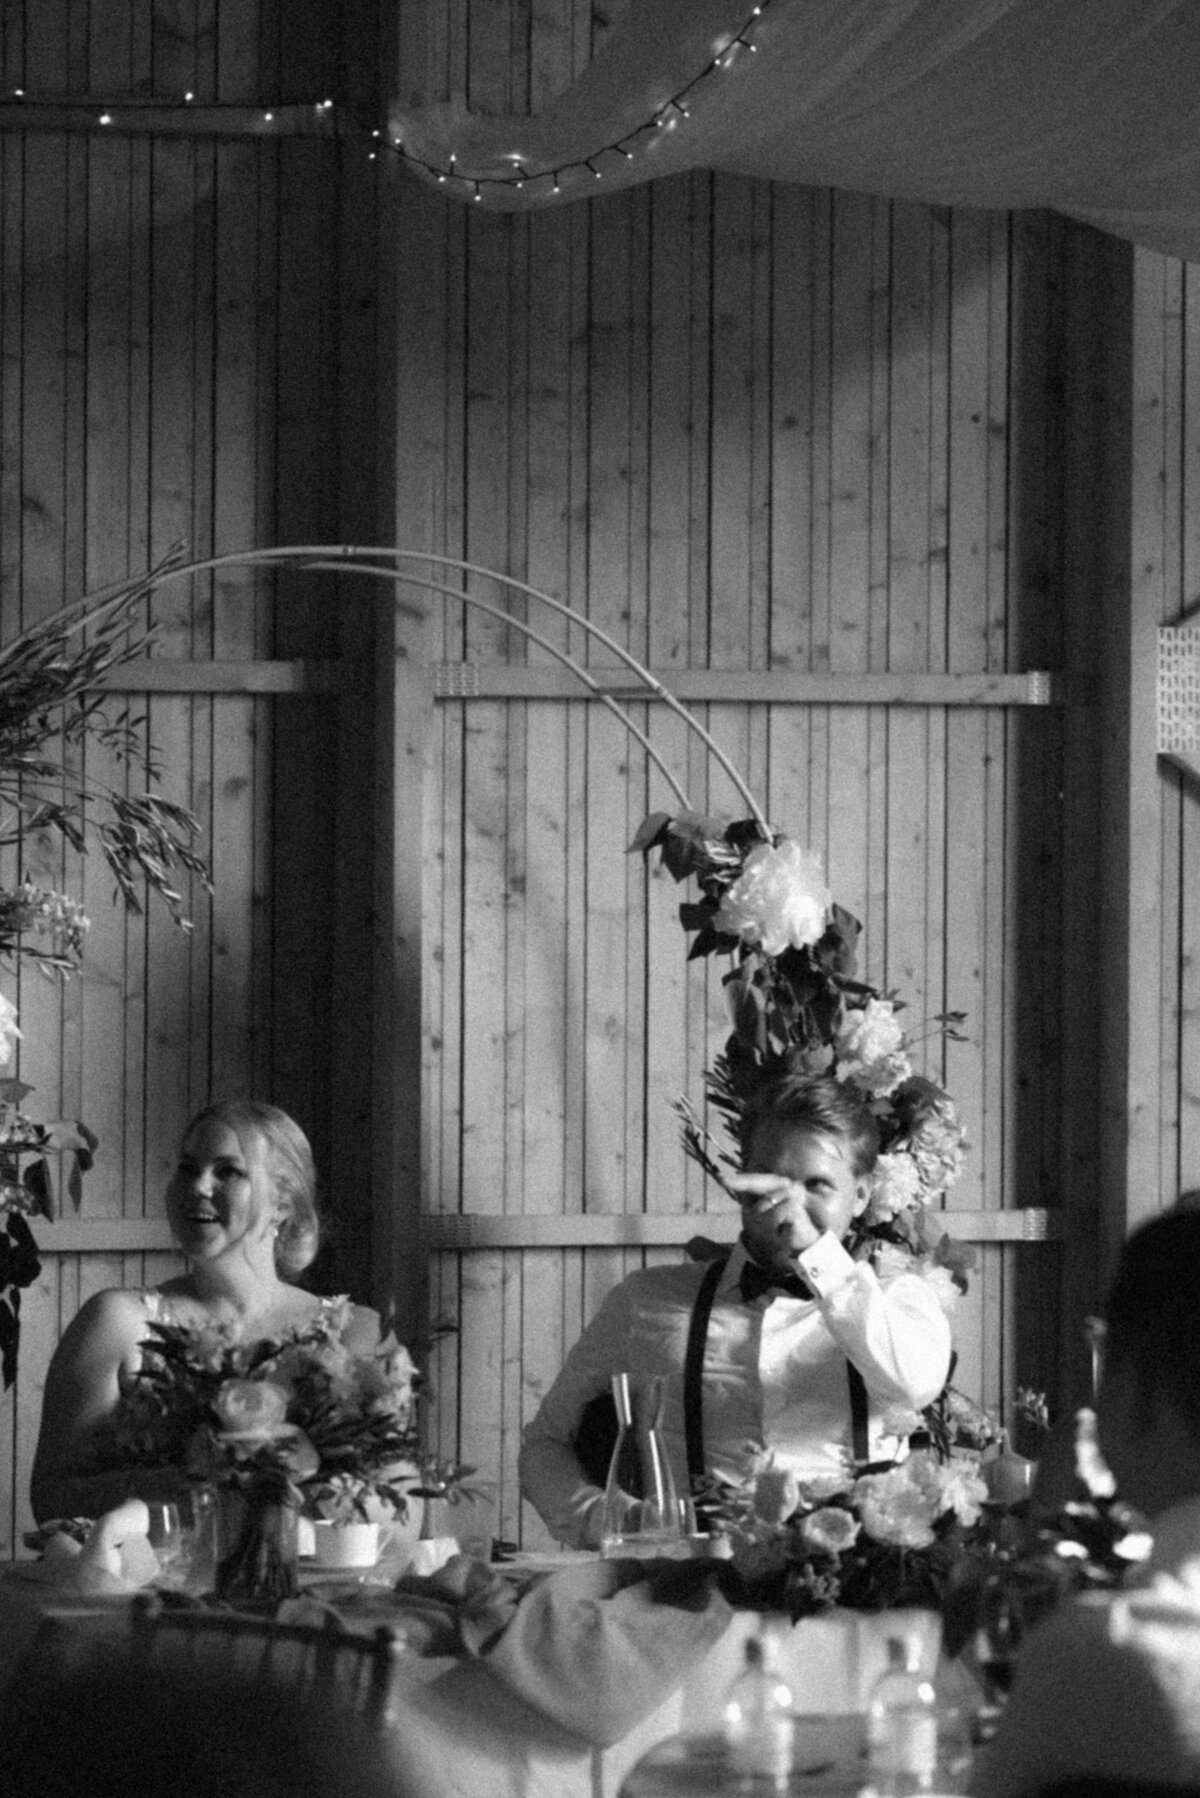 The groom is communicating with someone  in an image photographed by wedding photographer Hannika Gabrielsson.